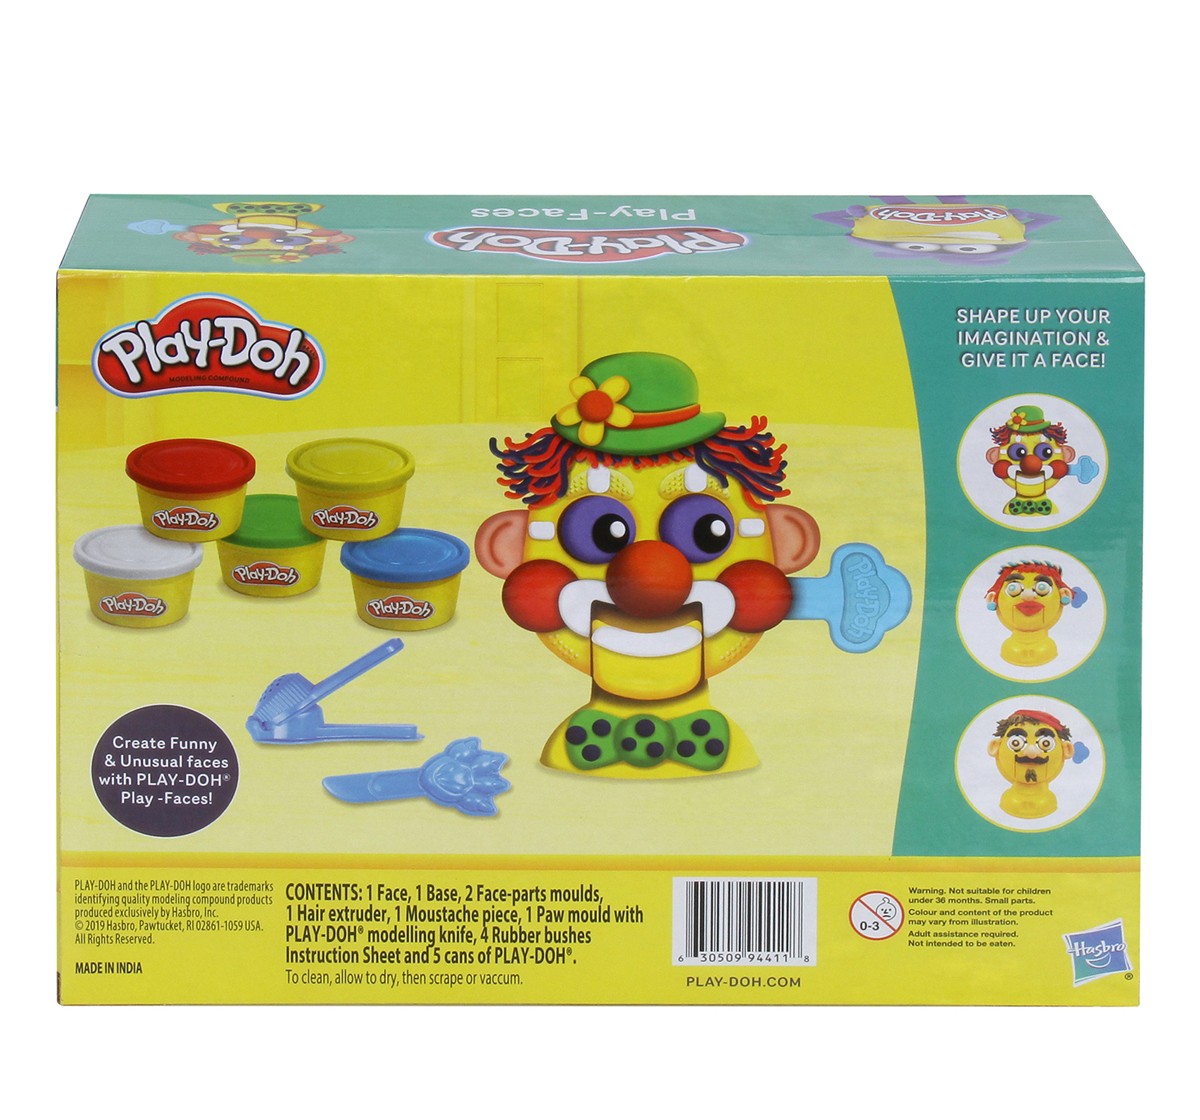 Play Doh Play Faces Activity Toy with 5 NonToxic Play Doh Colors for Kids Multicolor 3Y+